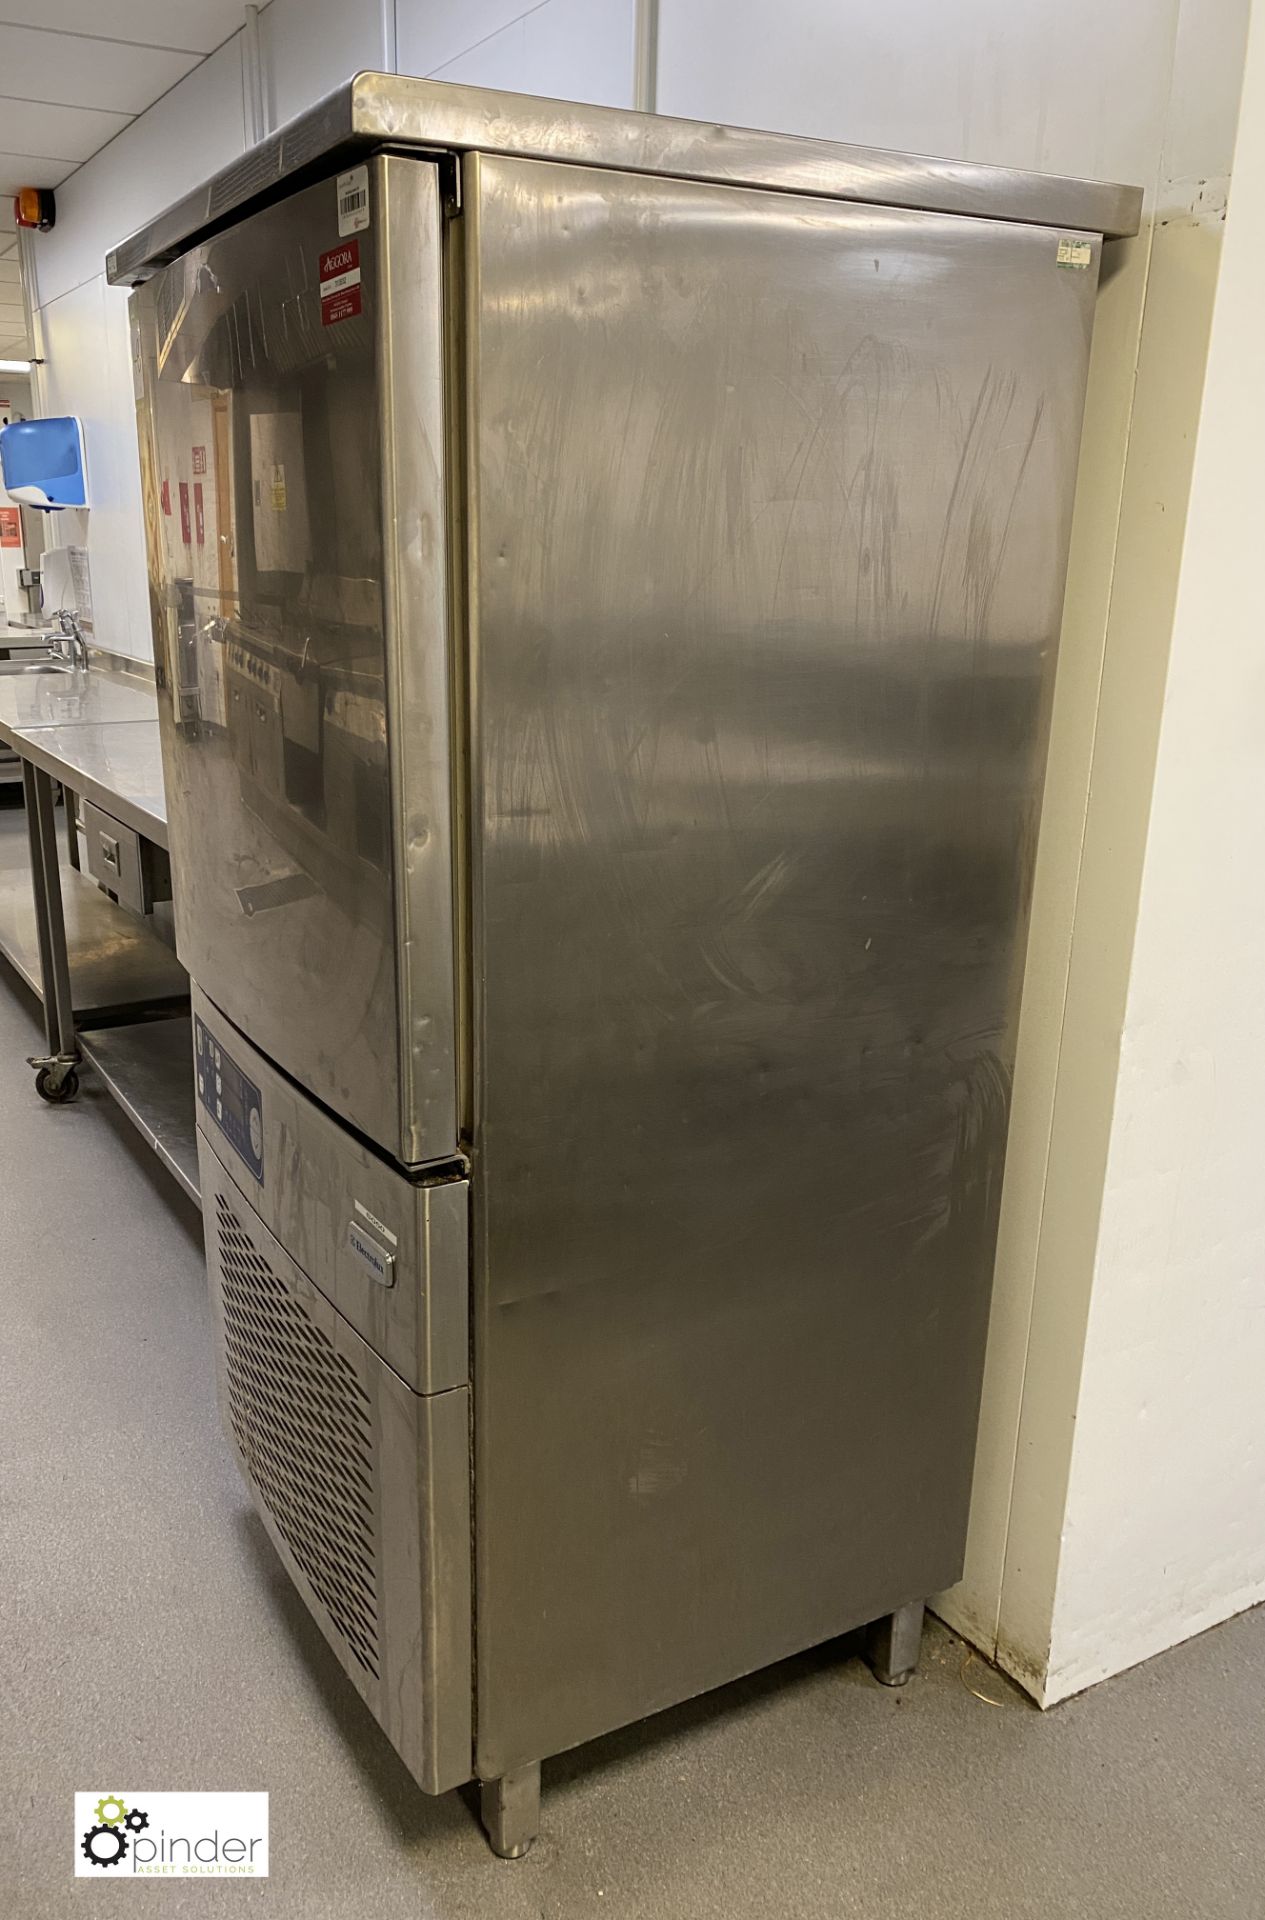 Electrolux stainless steel Blast Freezer/Chiller (located in Main Kitchen) - Image 4 of 4